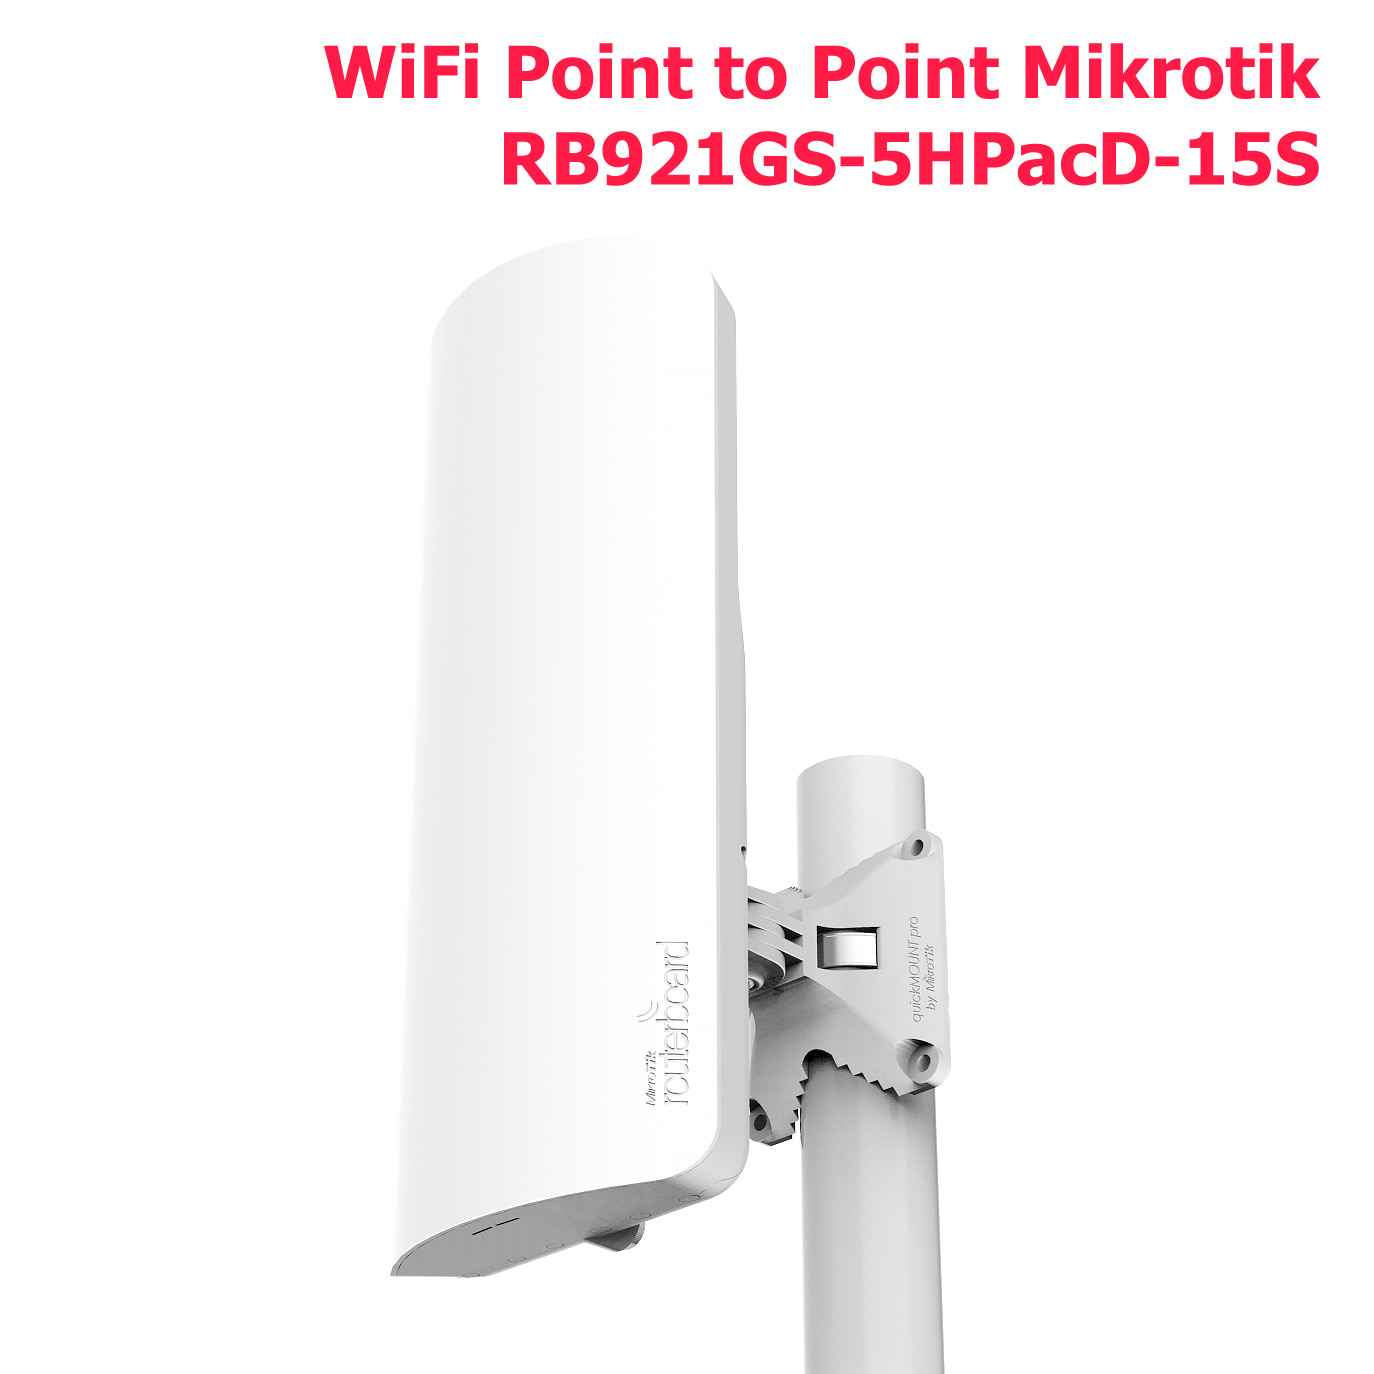 Bộ phát WiFi Point to Point Mikrotik RB921GS-5HPacD-15S